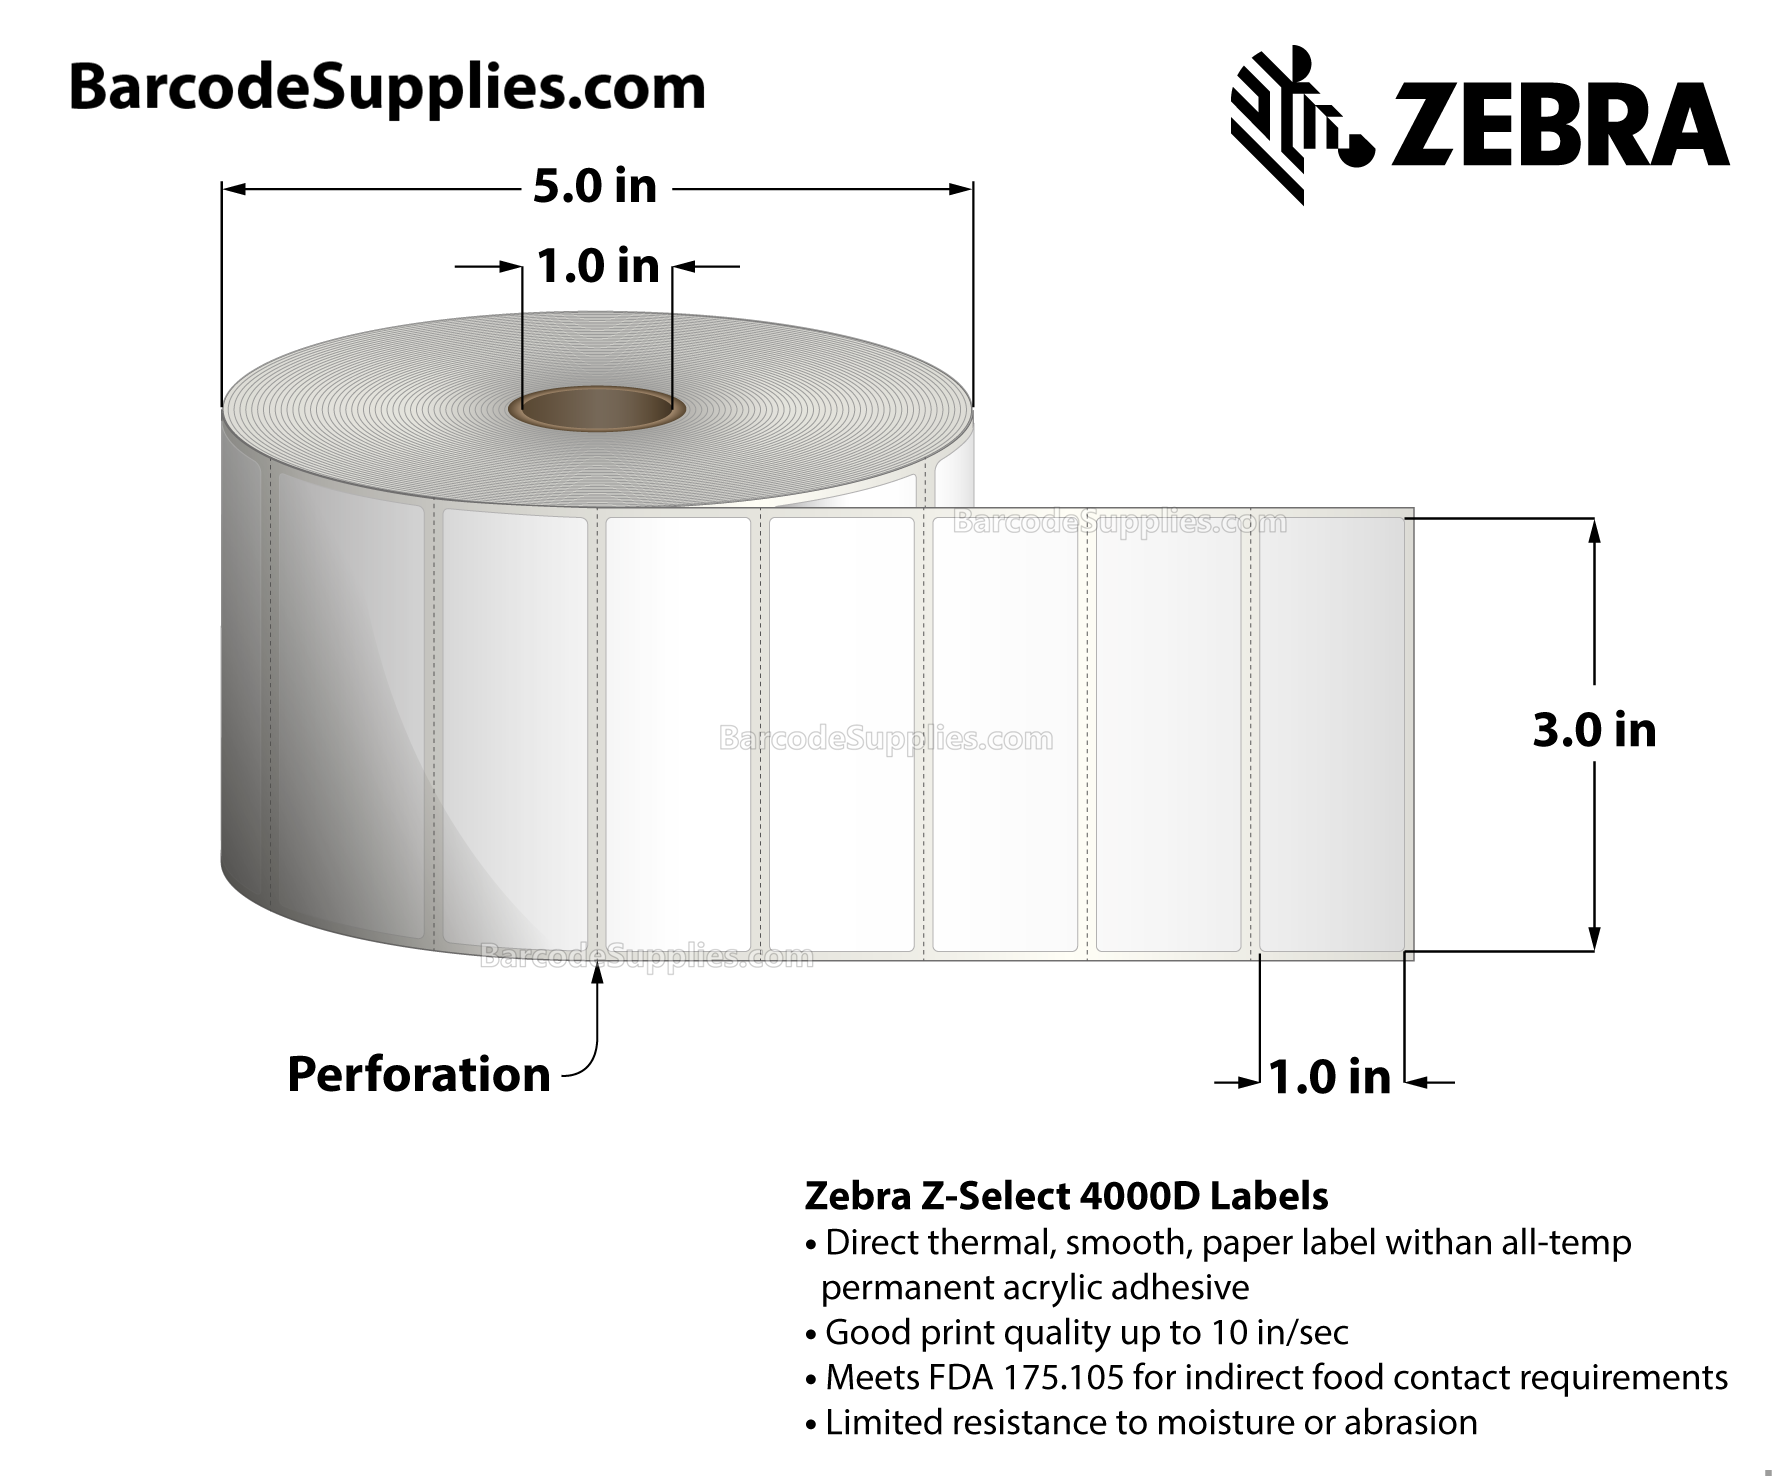 3 x 1 Direct Thermal White Z-Select 4000D Labels With All-Temp Adhesive - Perforated - 2340 Labels Per Roll - Carton Of 6 Rolls - 14040 Labels Total - MPN: 10010043